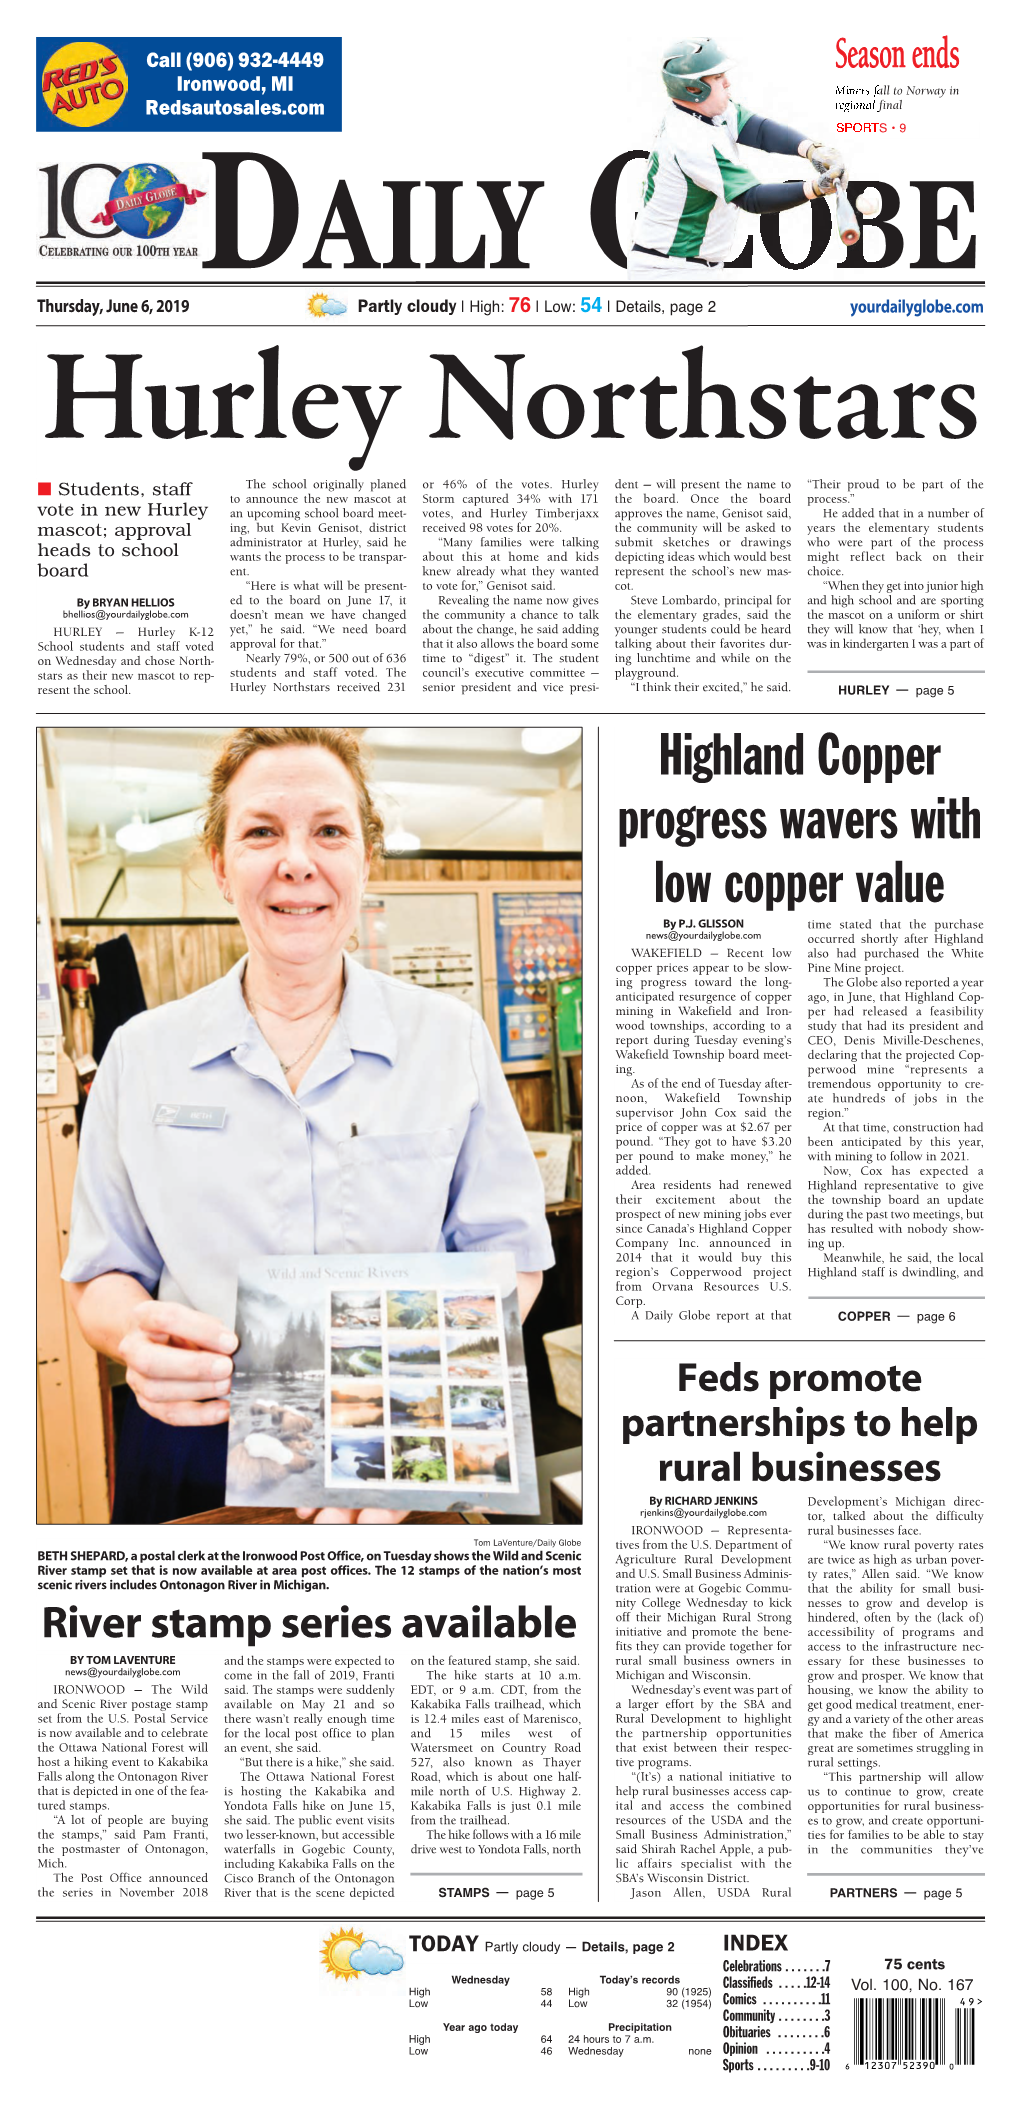 Highland Copper Progress Wavers with Low Copper Value by P.J